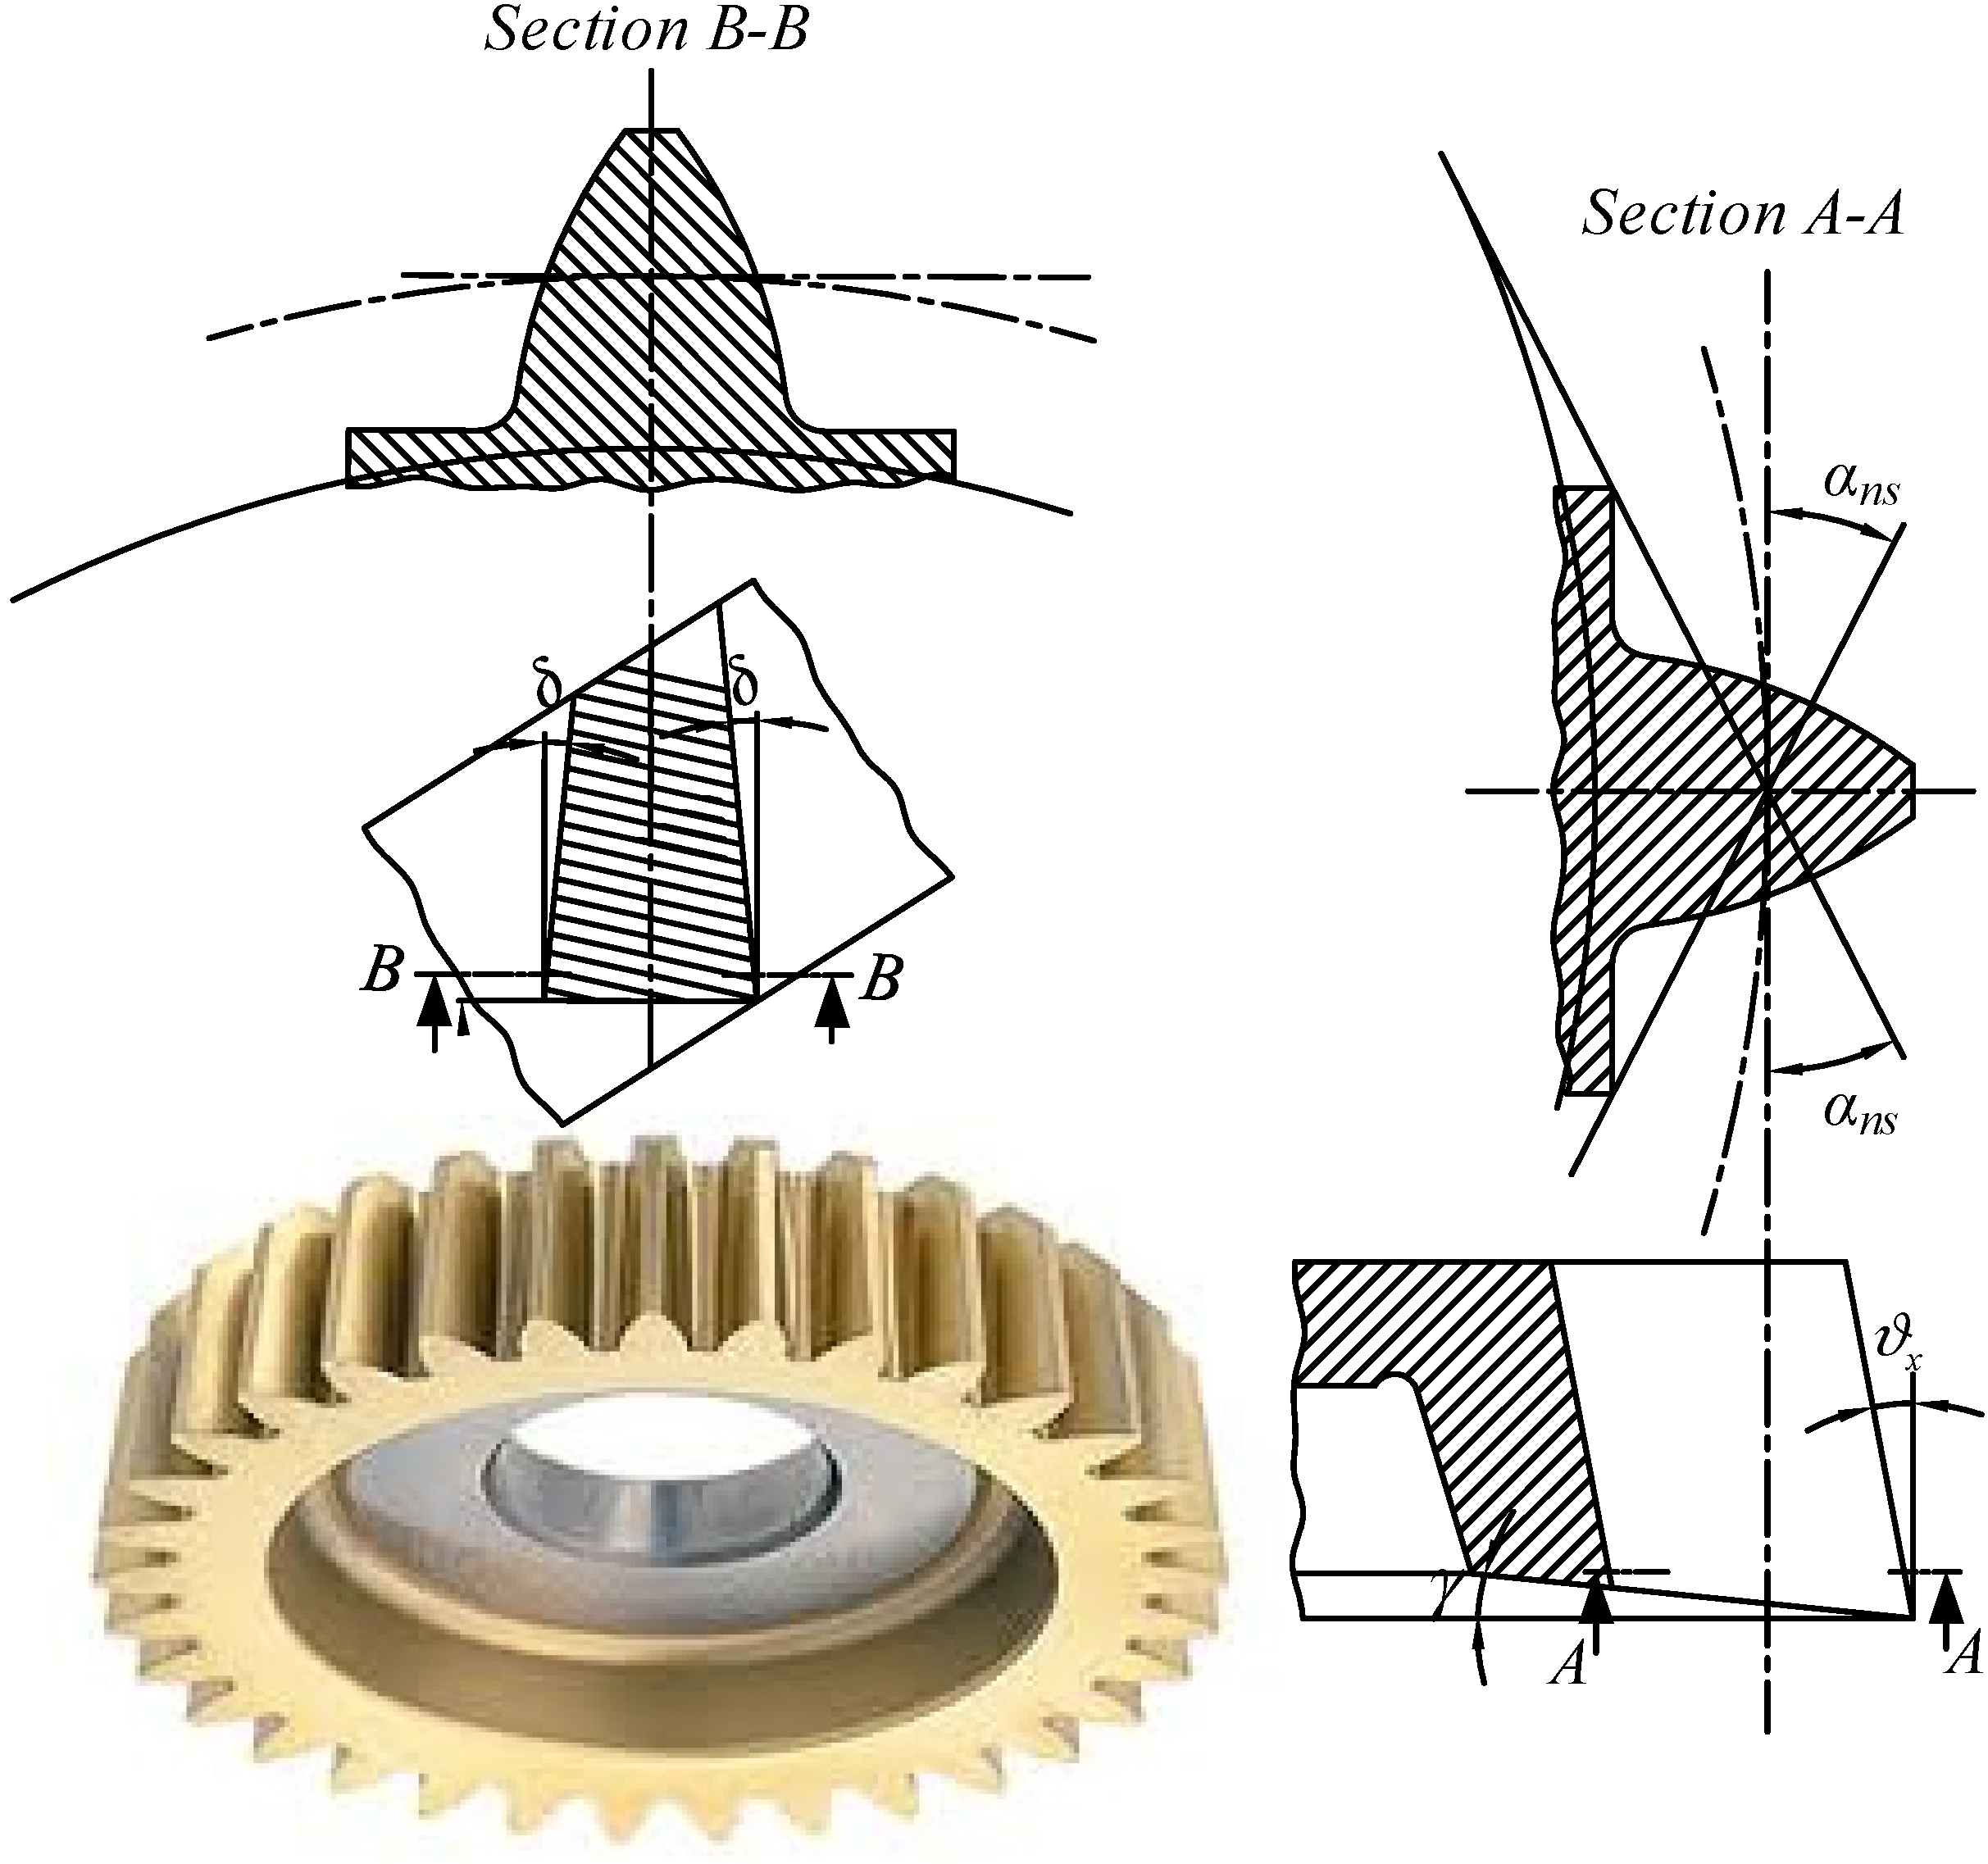 Bevel / Spiral Bevel Gear - Bevel Gears, Made in Taiwan Spur Gears,  Rolling and Forming Machines Manufacturer